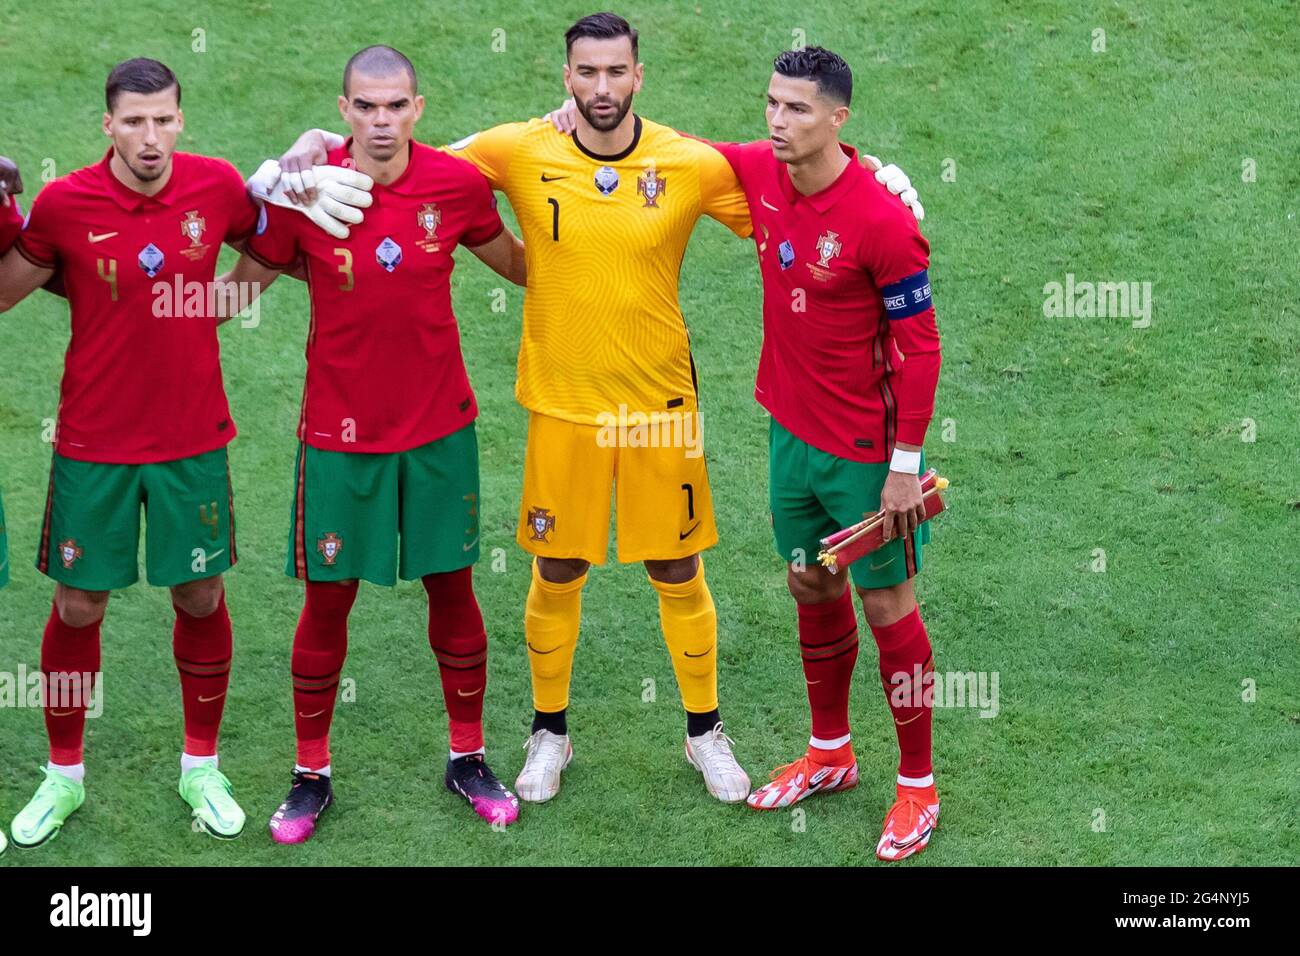 Munich, Germany. 19th June, 2021. Ruben Dias, Pepe, Rui Patricio and Cristiano Ronaldo are singing the national anthem during the UEFA EURO 2020 Championship Group F match between Portugal and Germany at Football Arena Munich. (Final score; Portugal 2:4 Germany) Credit: SOPA Images Limited/Alamy Live News Stock Photo